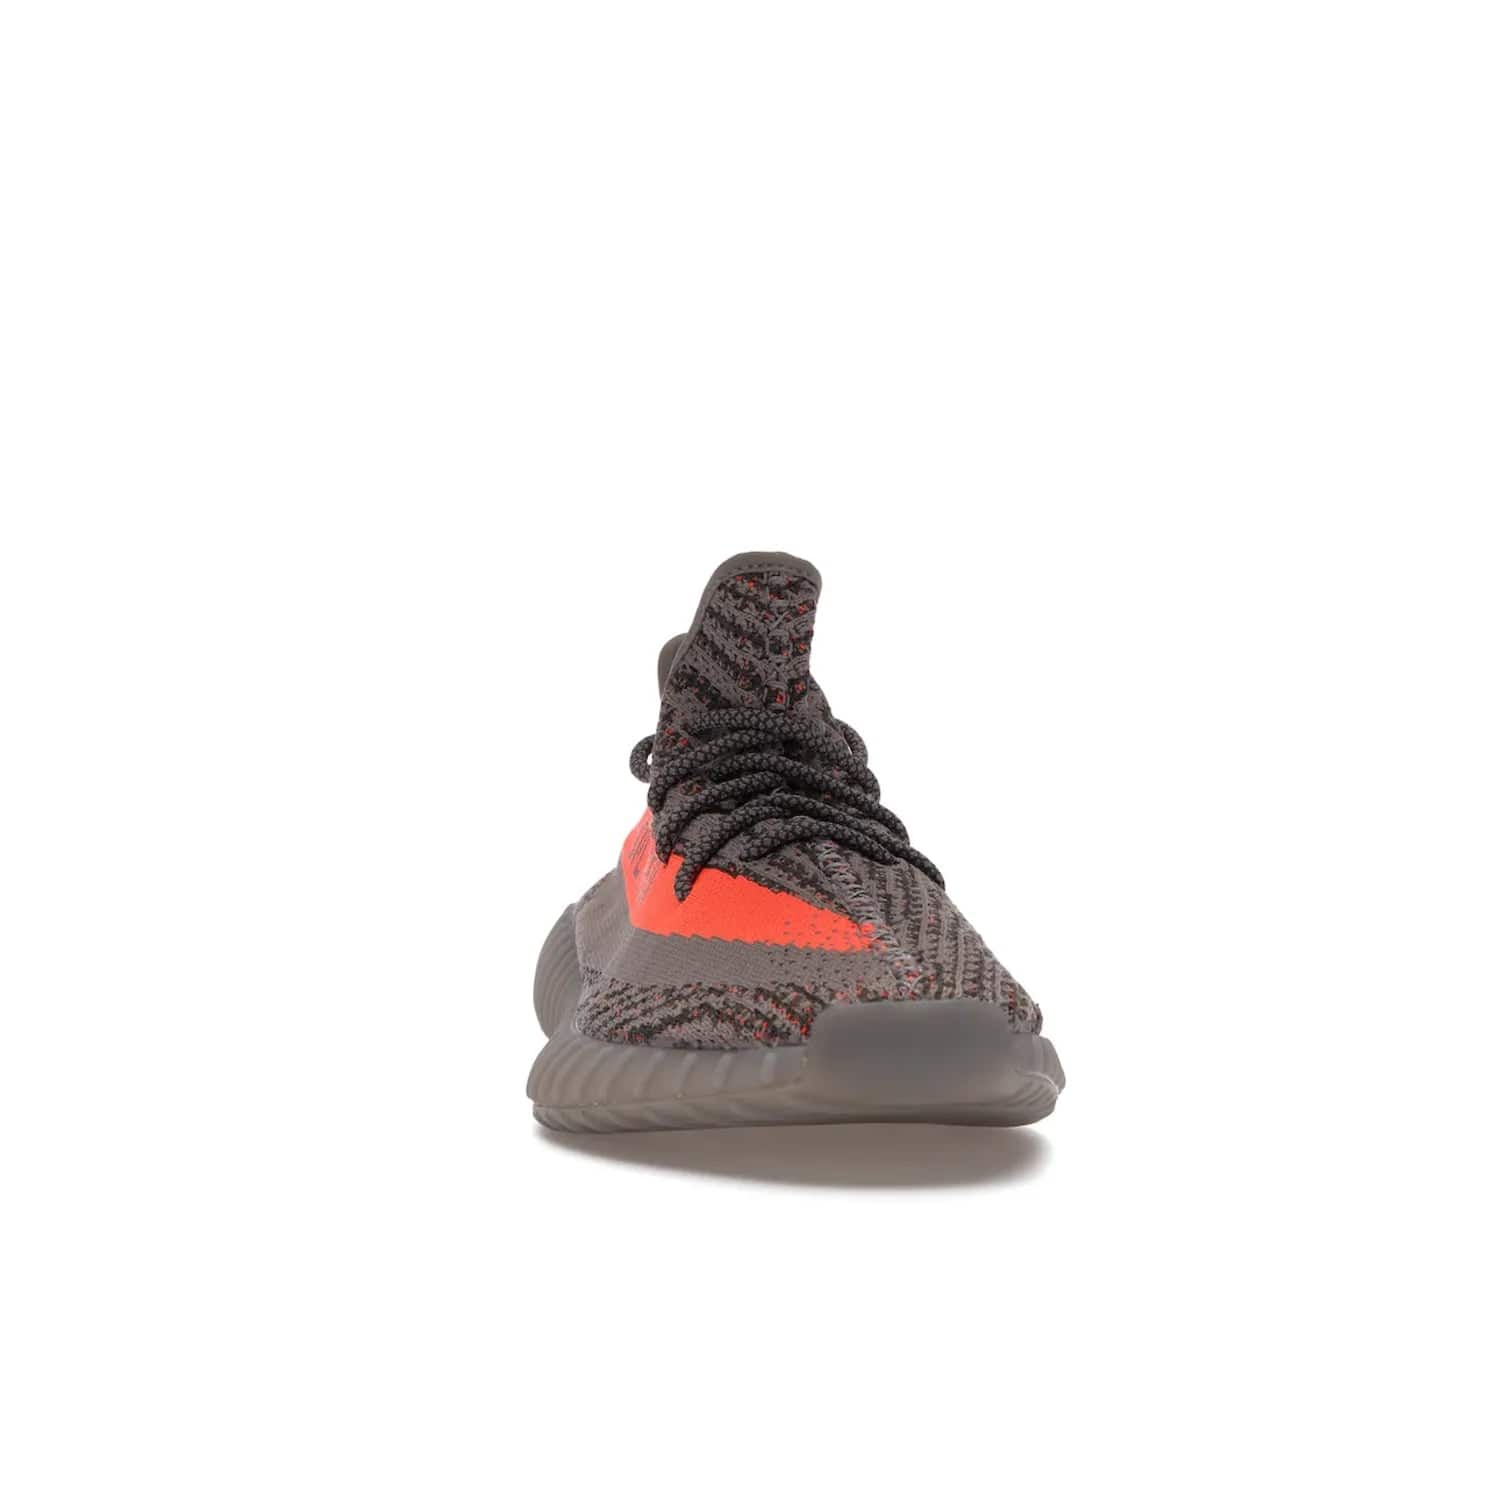 adidas Yeezy Boost 350 V2 Beluga Reflective - Image 9 - Only at www.BallersClubKickz.com - Shop the adidas Yeezy Boost 350 V2 Beluga Reflective: a stylish, reflective sneaker that stands out. Featuring Boost sole, Primeknit upper & signature orange stripe. Available Dec 2021.